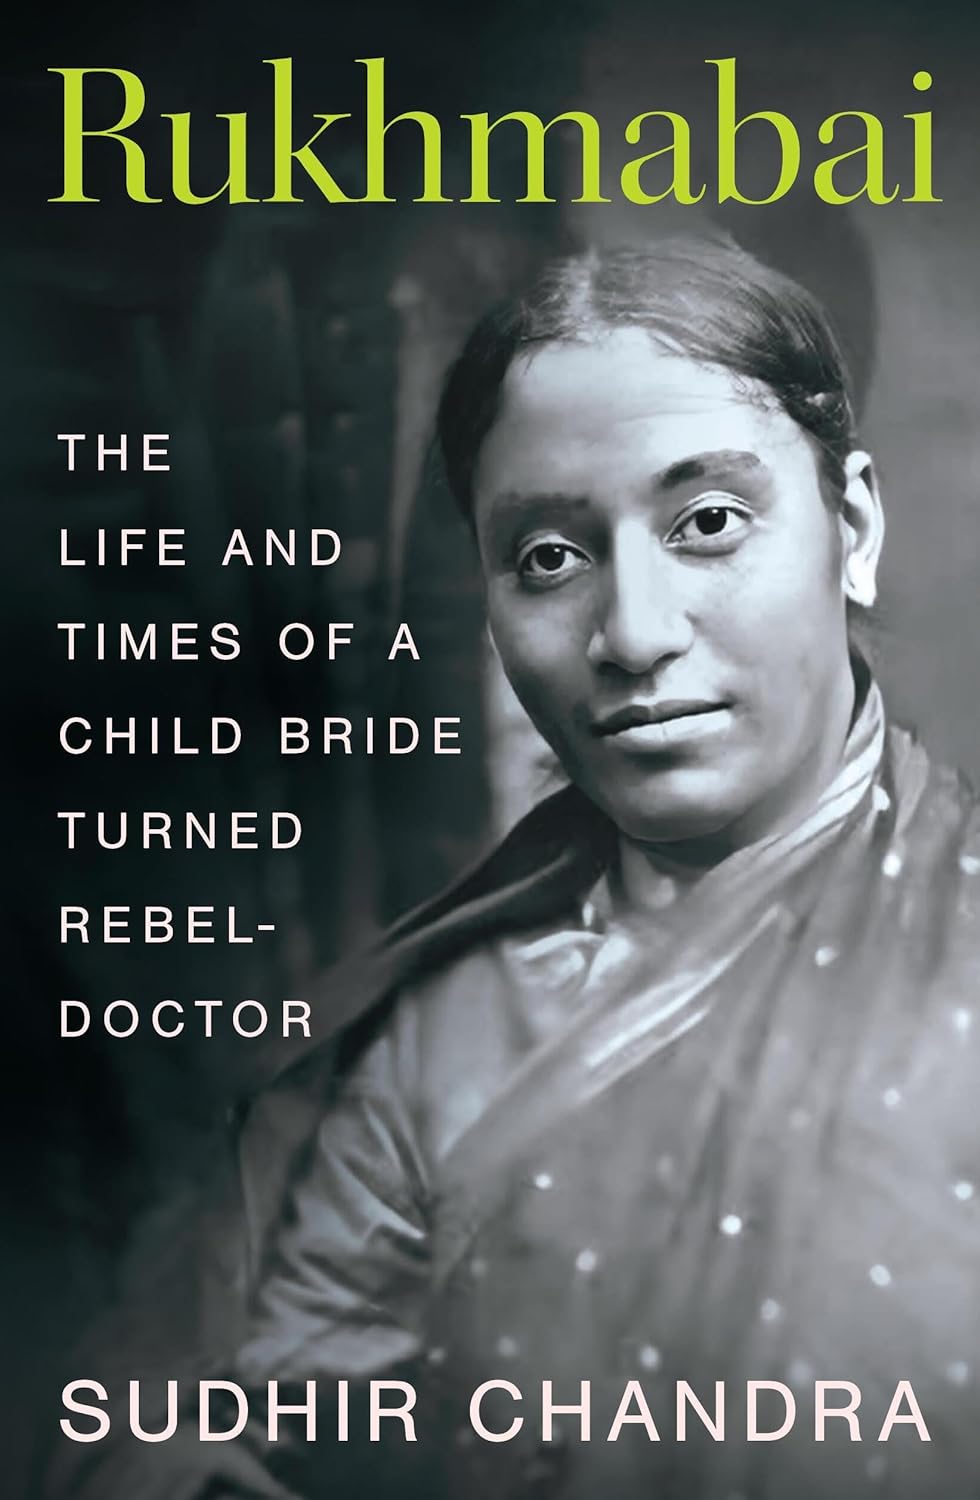 Rukhmabai: The Life and Times of a Child Bride Turned Rebel-Doctor